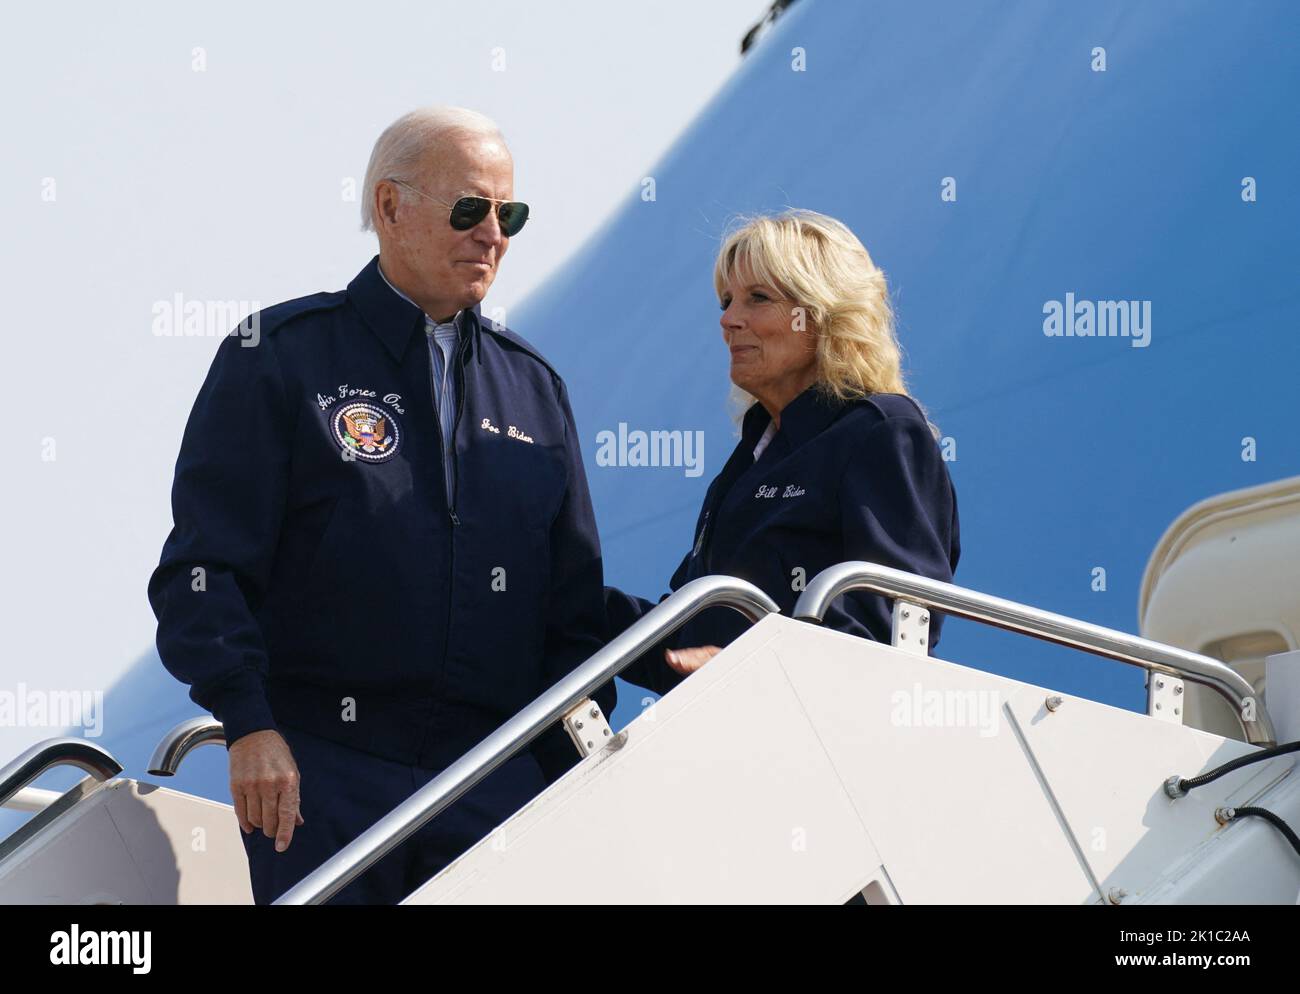 U.S. President Joe Biden and first lady Jill Biden board Air Force One as they depart  for London to attend the funeral of Britain's Queen Elizabeth, from Joint Base Andrews in Maryland, U.S., September 17, 2022. REUTERS/Kevin Lamarque Stock Photo